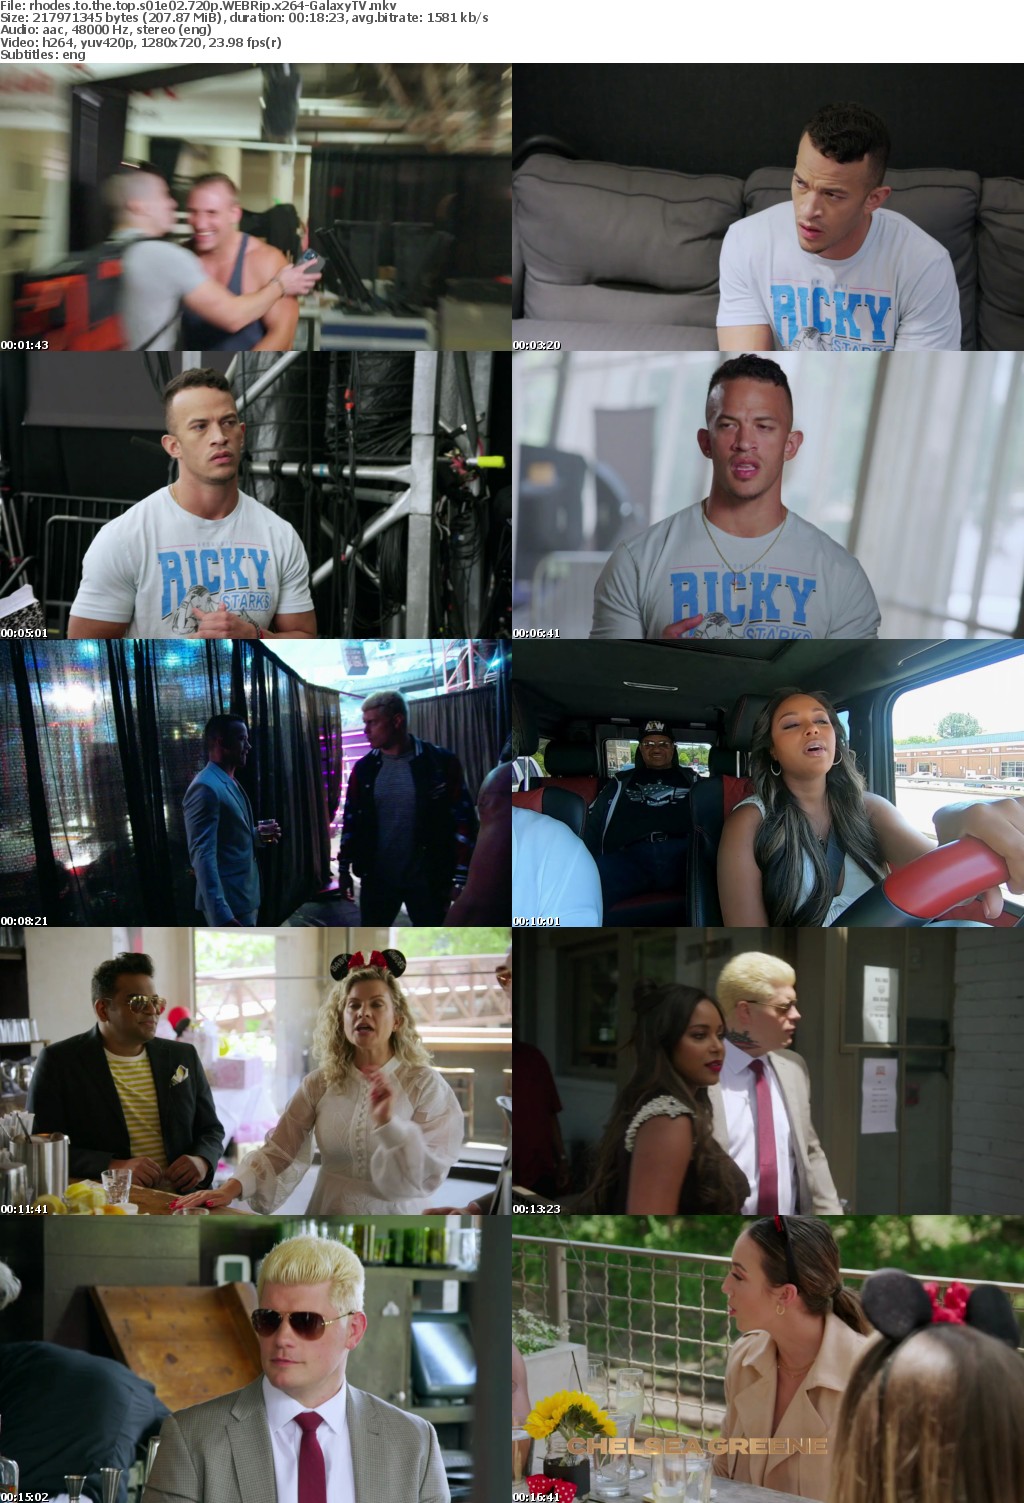 Rhodes to the Top S01 COMPLETE 720p WEBRip x264-GalaxyTV